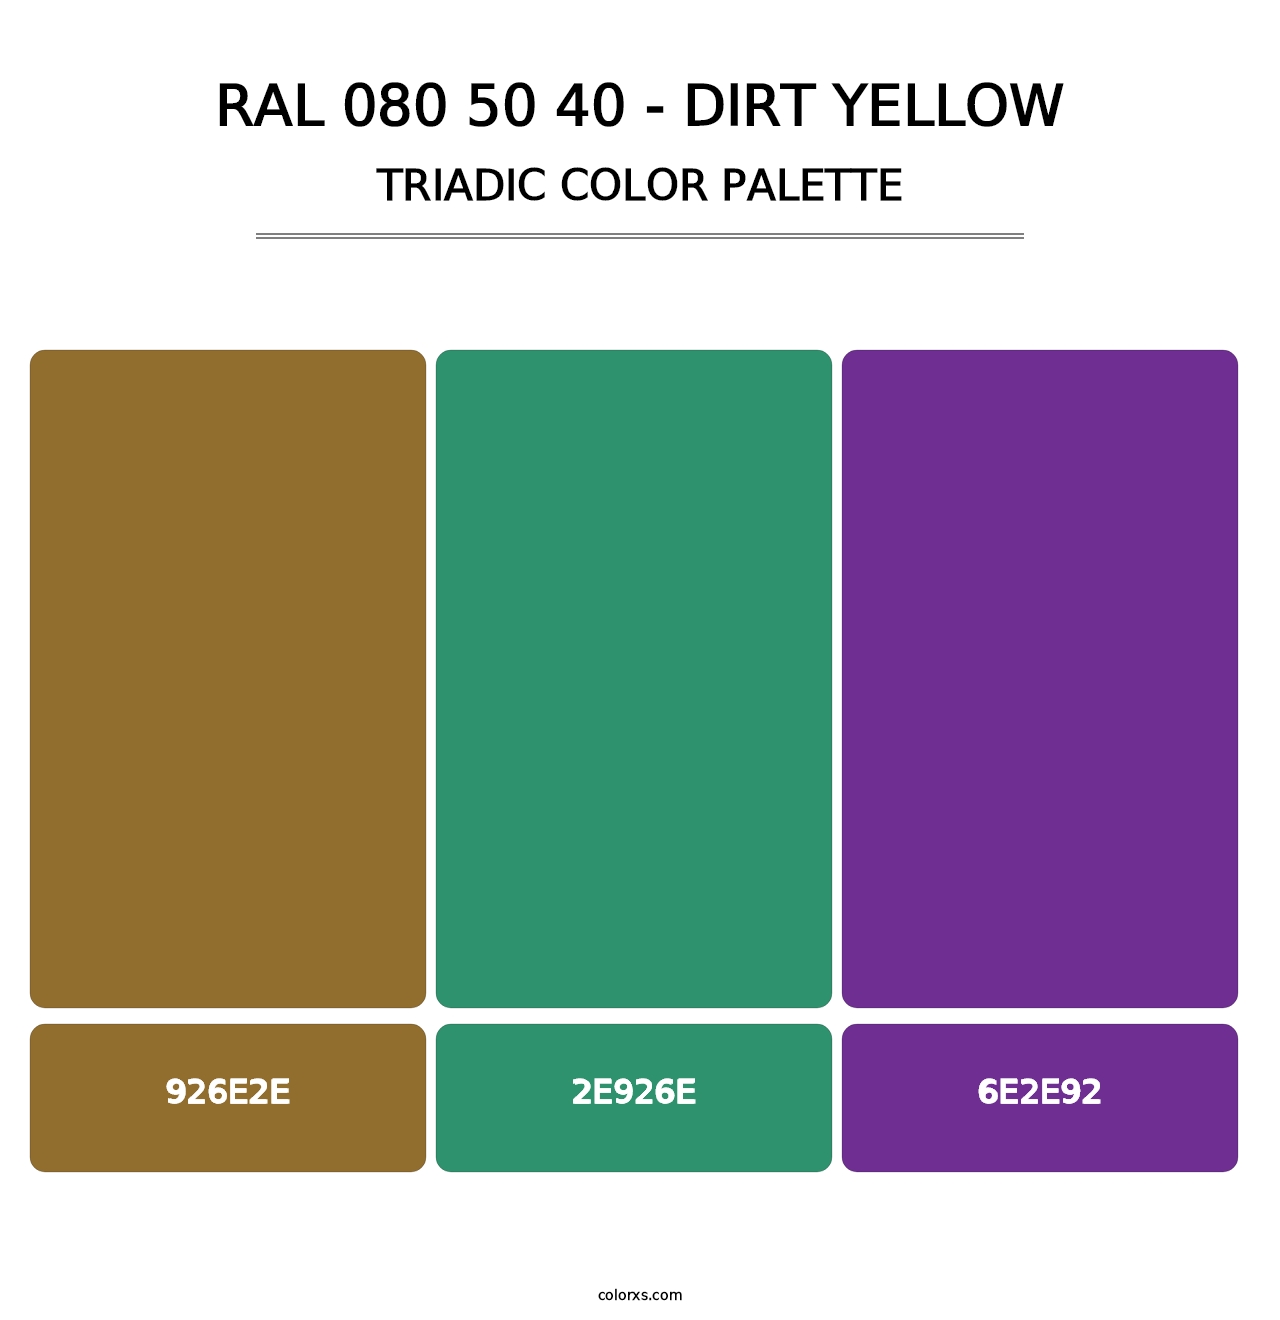 RAL 080 50 40 - Dirt Yellow - Triadic Color Palette